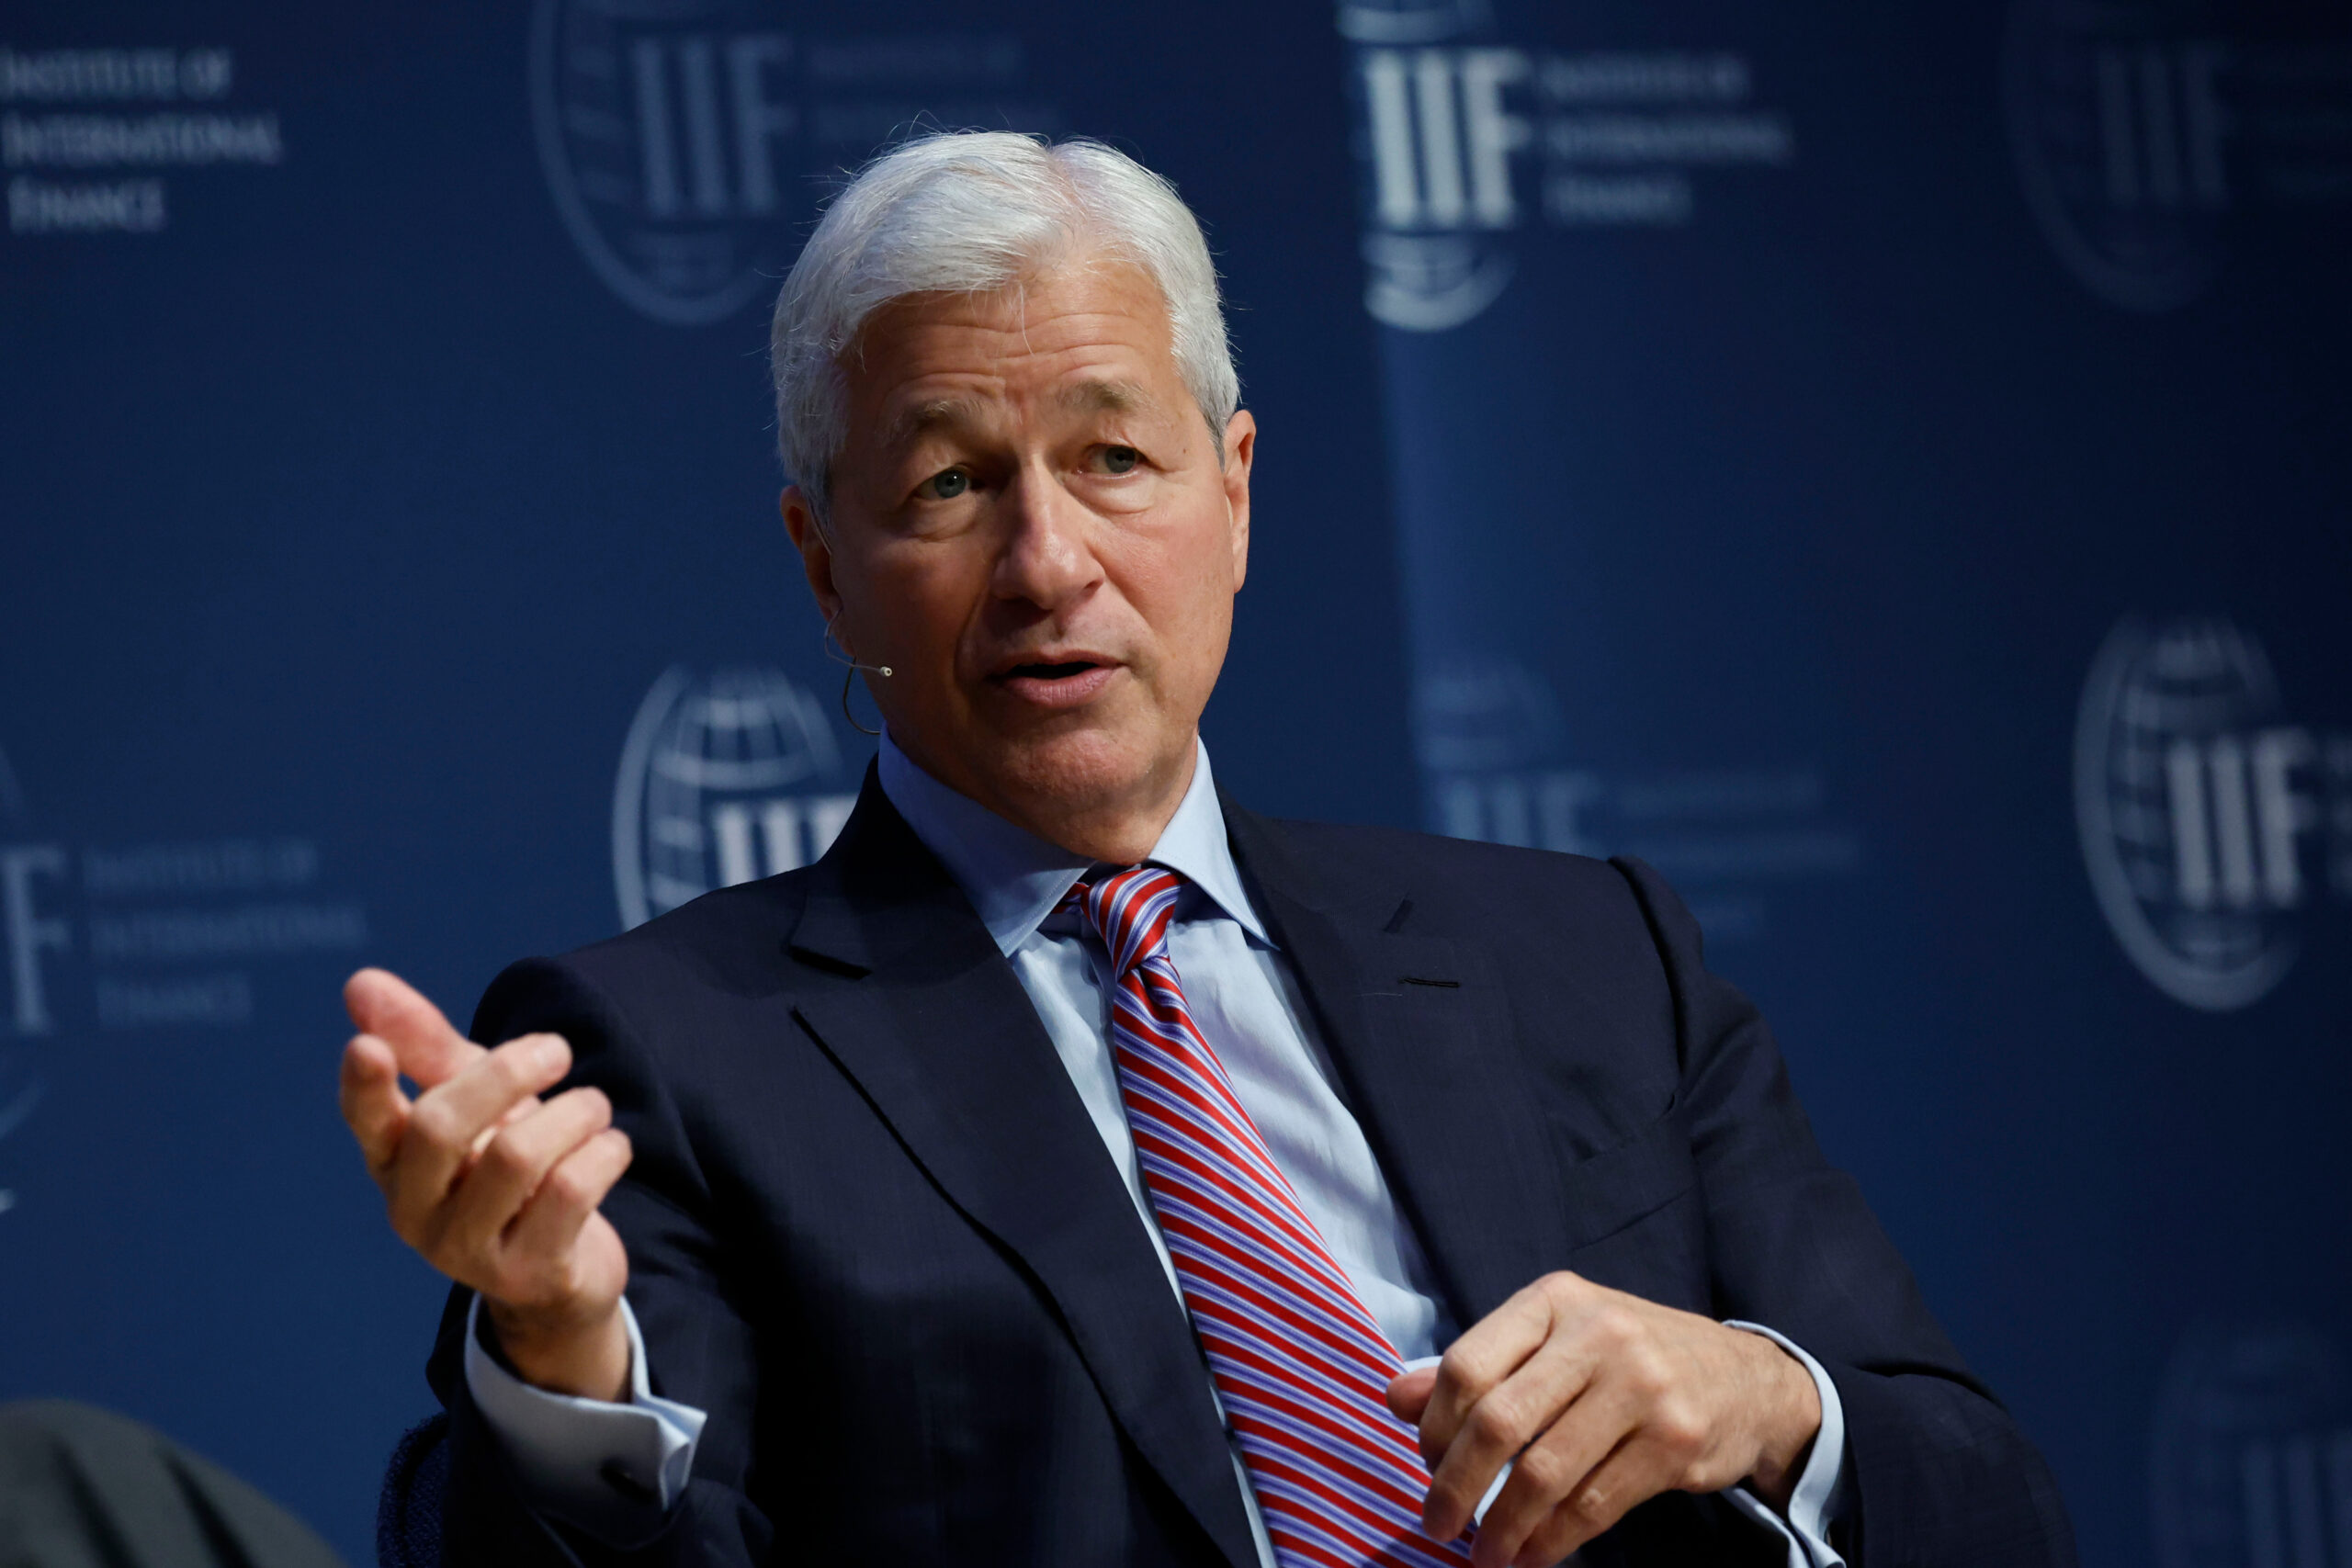 JPMorgan Chase CEO Jamie Dimon Will Be Deposed Under Oath About Bank’s Links To Jeffrey Epstein